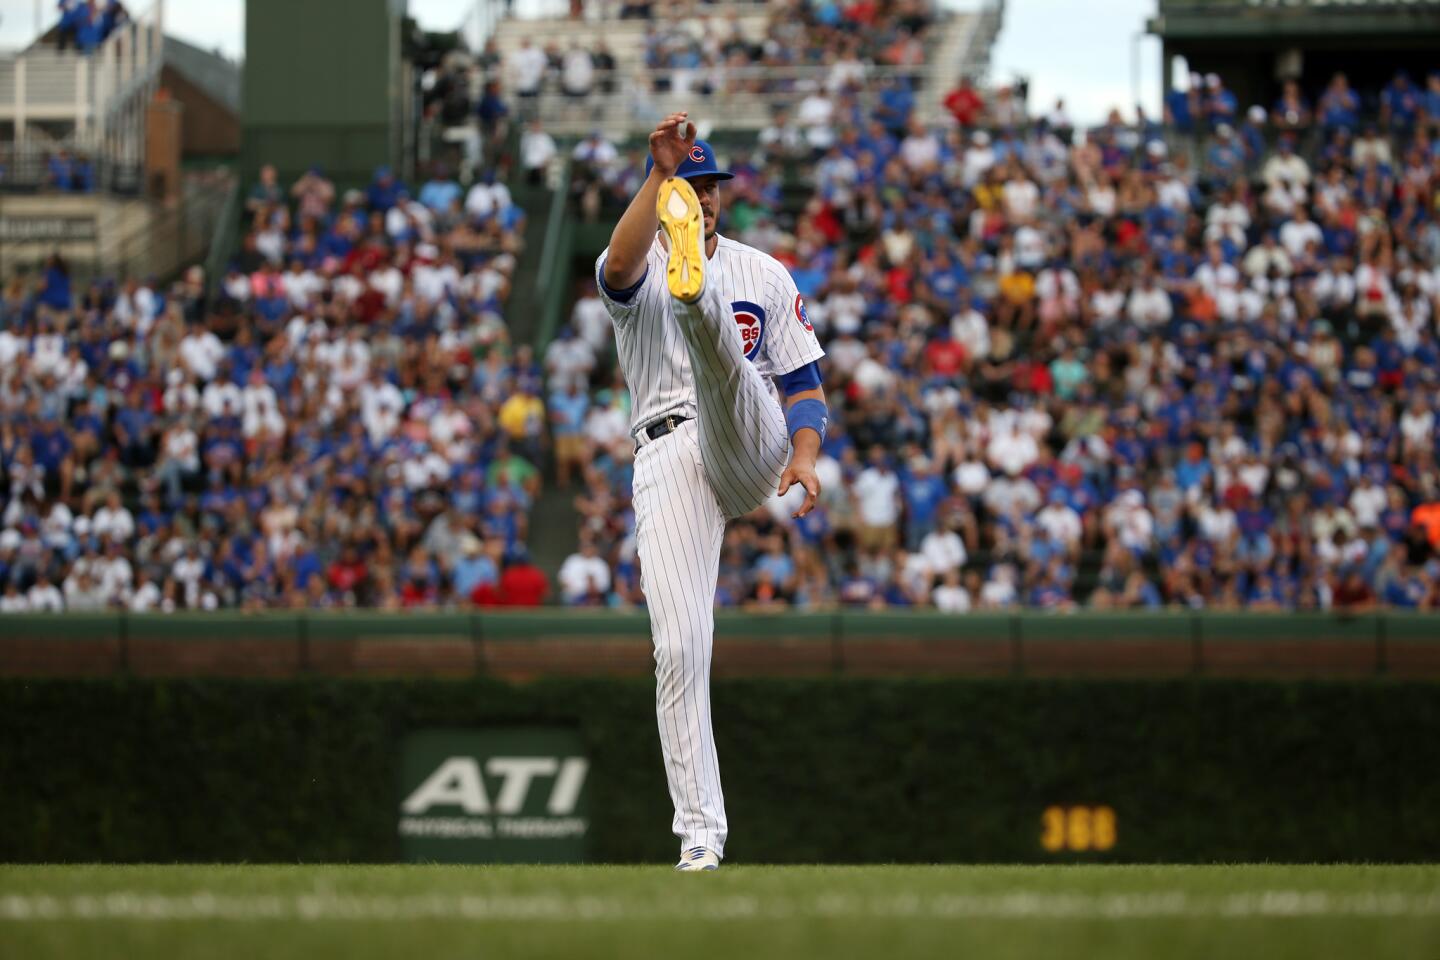 Cubs third baseman Kris Bryant stretches before the start of a game against the Diamondbacks at Wrigley Field on Monday, July 23, 2018.